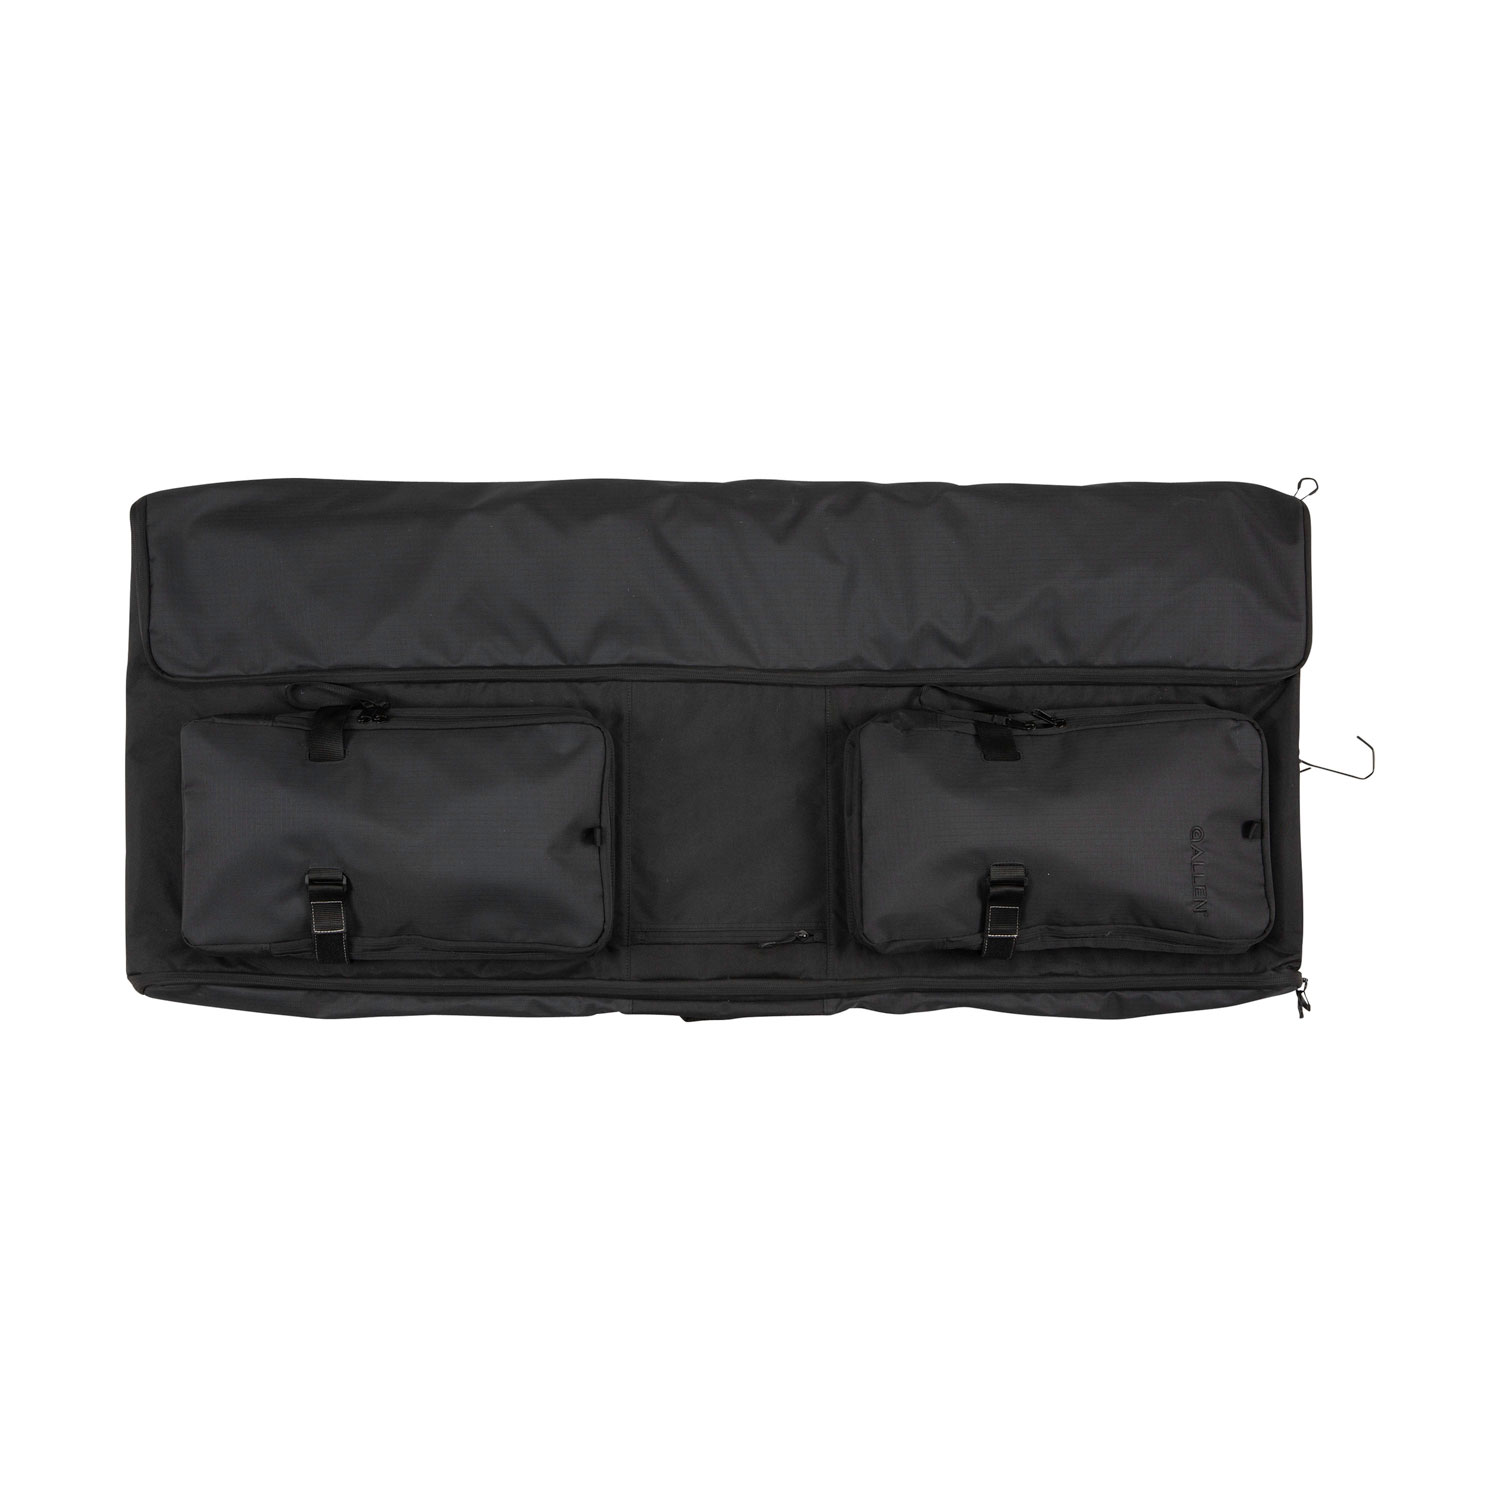 Allen 78103 Gun Closet Hanging Garment Case with Tricot Lining, 8 Mag Storage Compartments, Lockable Zippers & Black Finish Holds up to 4 Handguns & 2 Long Guns